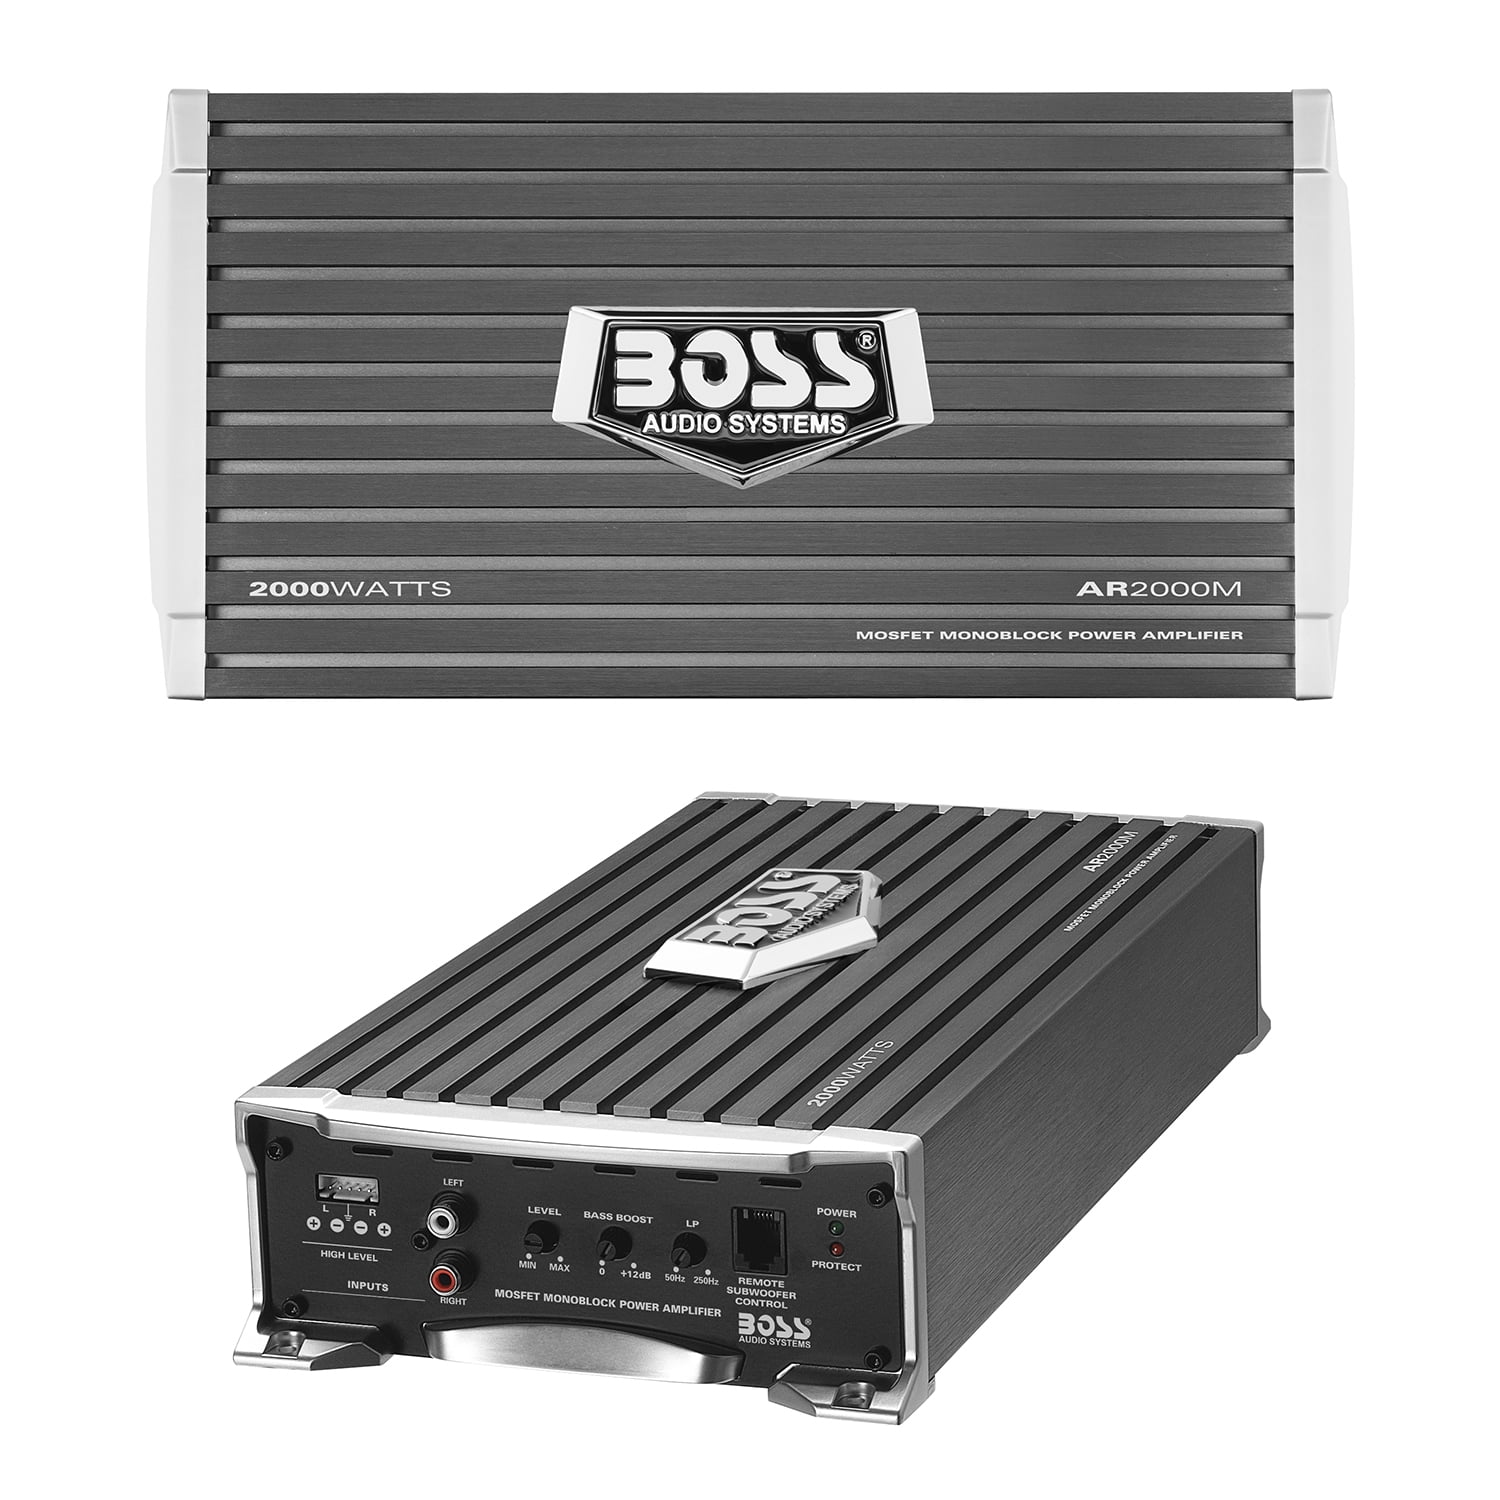 Mosfet Car Amplifier with Remote Subwoofer Control BOSS Audio Systems AR2000M Armor 2000 Watt 2 4 Ohm Stable Class AB Monoblock 